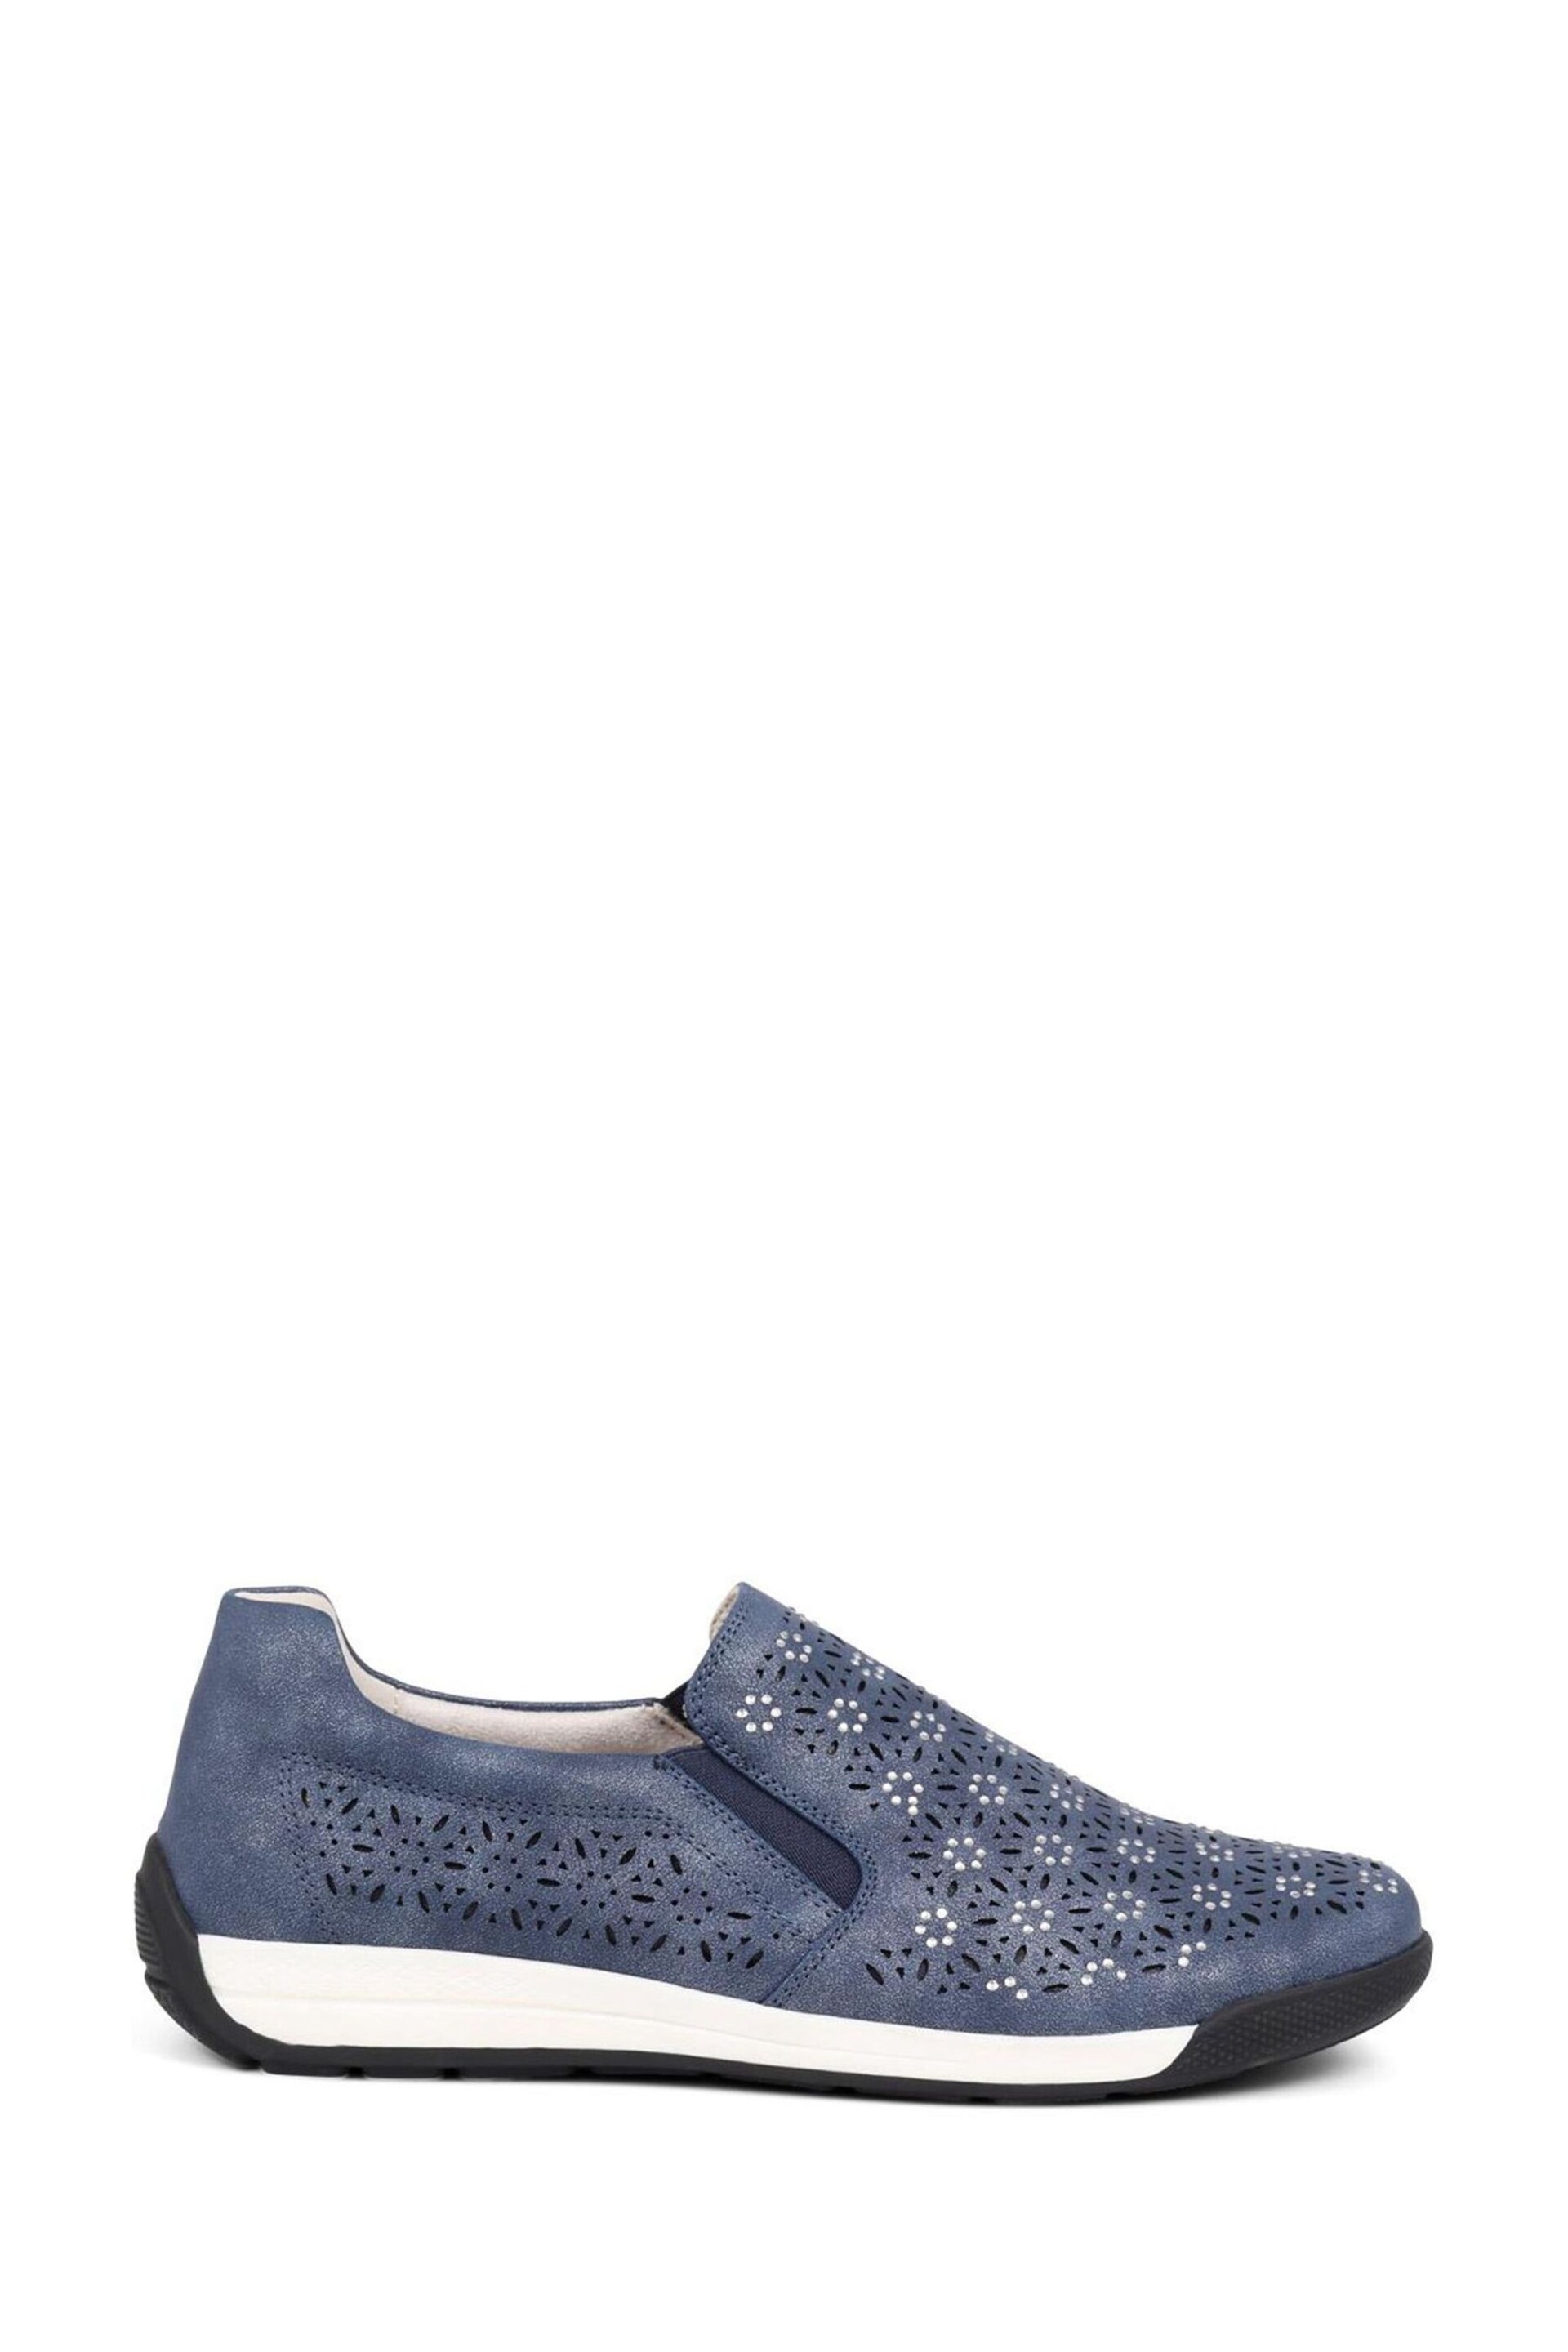 Pavers Perforated Slip On Shoes - Image 1 of 5